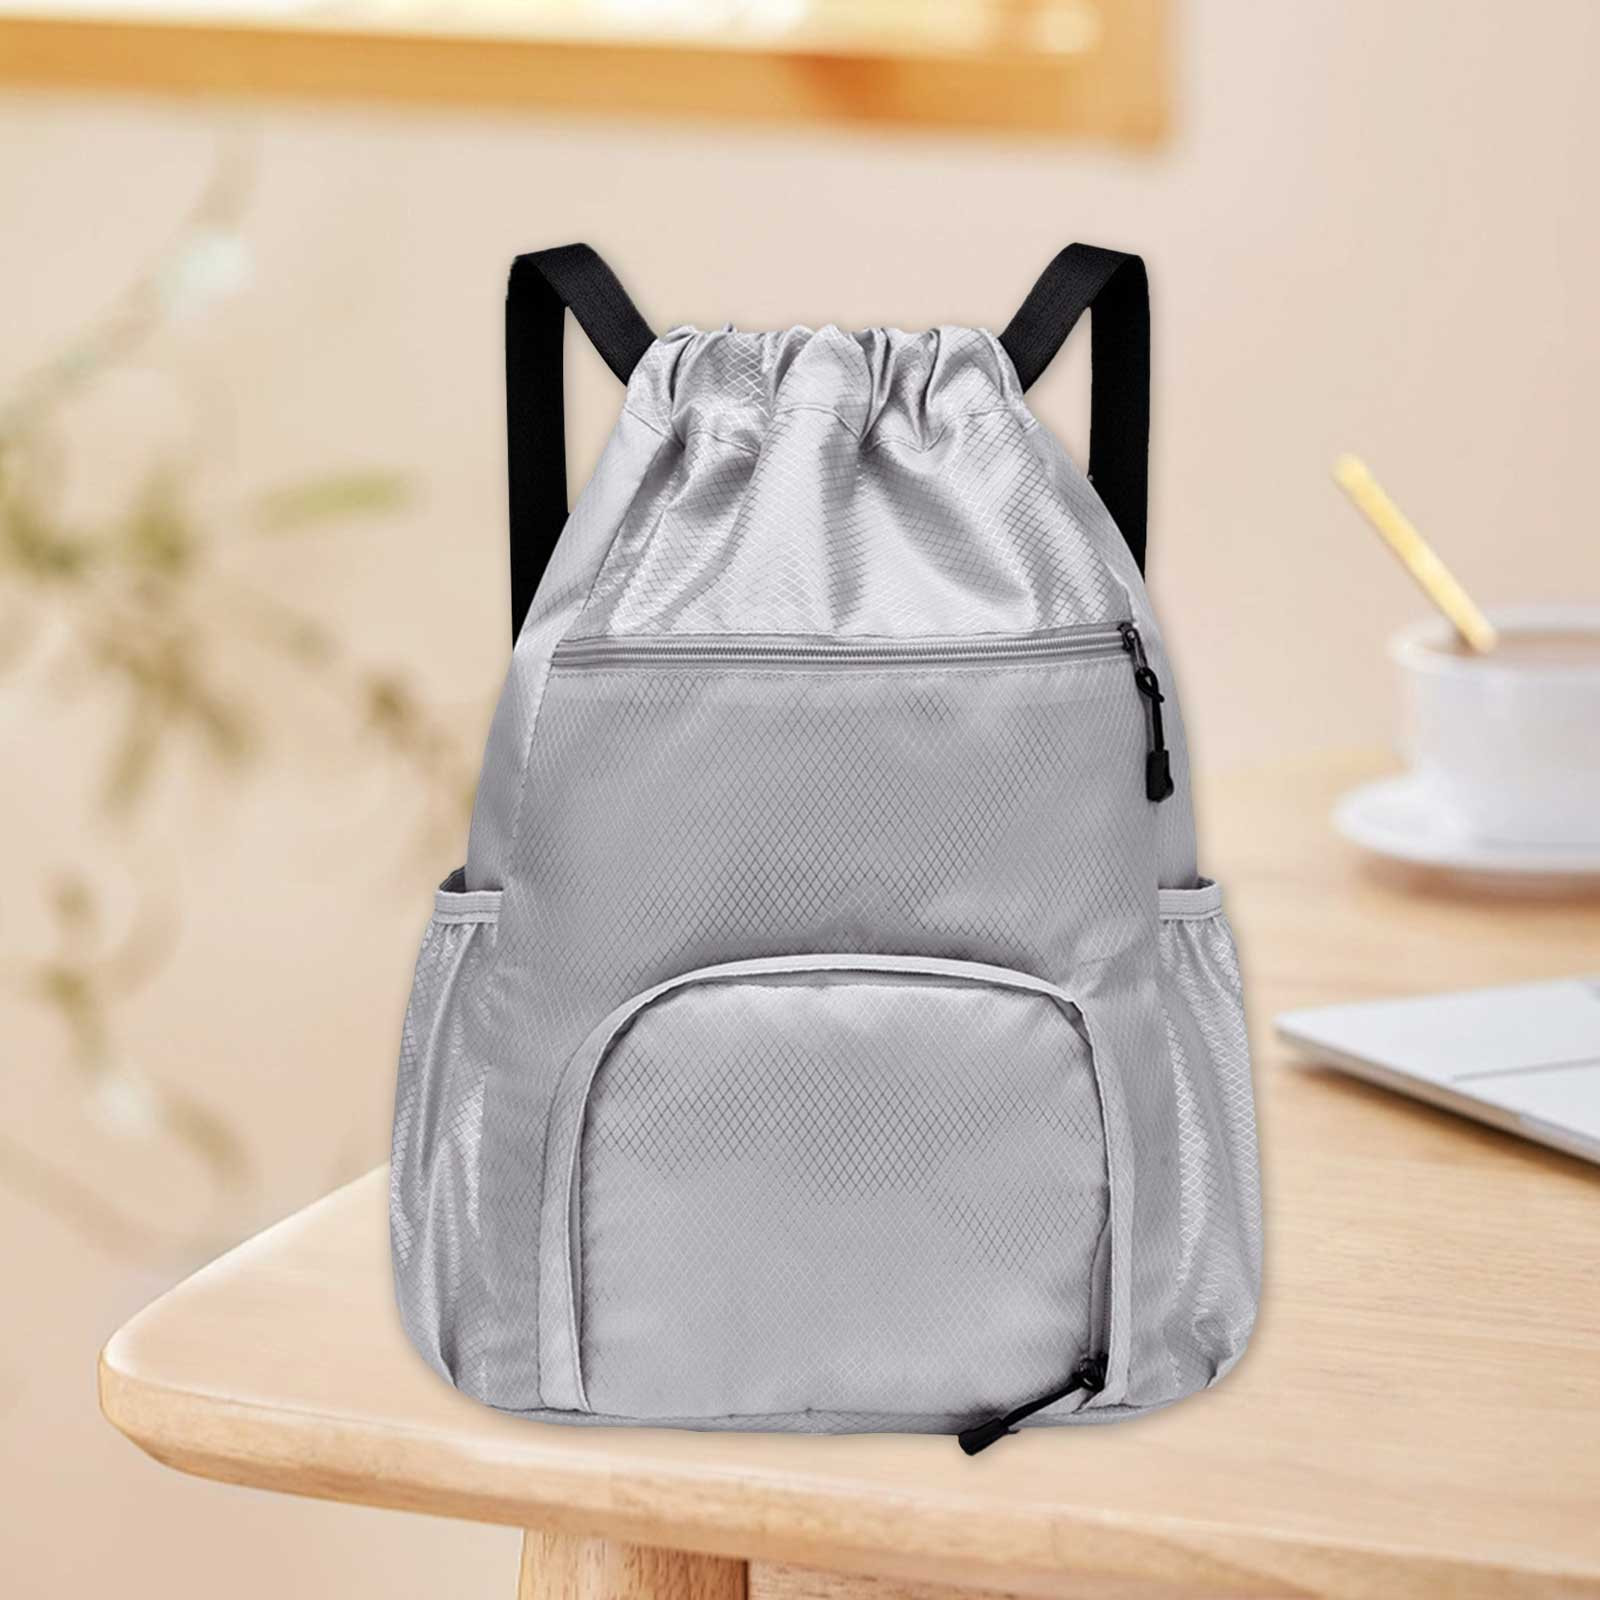 Sports Outdoors Sports Accessories Mesh Basketball Football Bag With Ball And Shoe Compartment For Boys Girls Man Women Ball Equipment Pack Soccer Backpack Sports Volleyball Gray - image 1 of 8